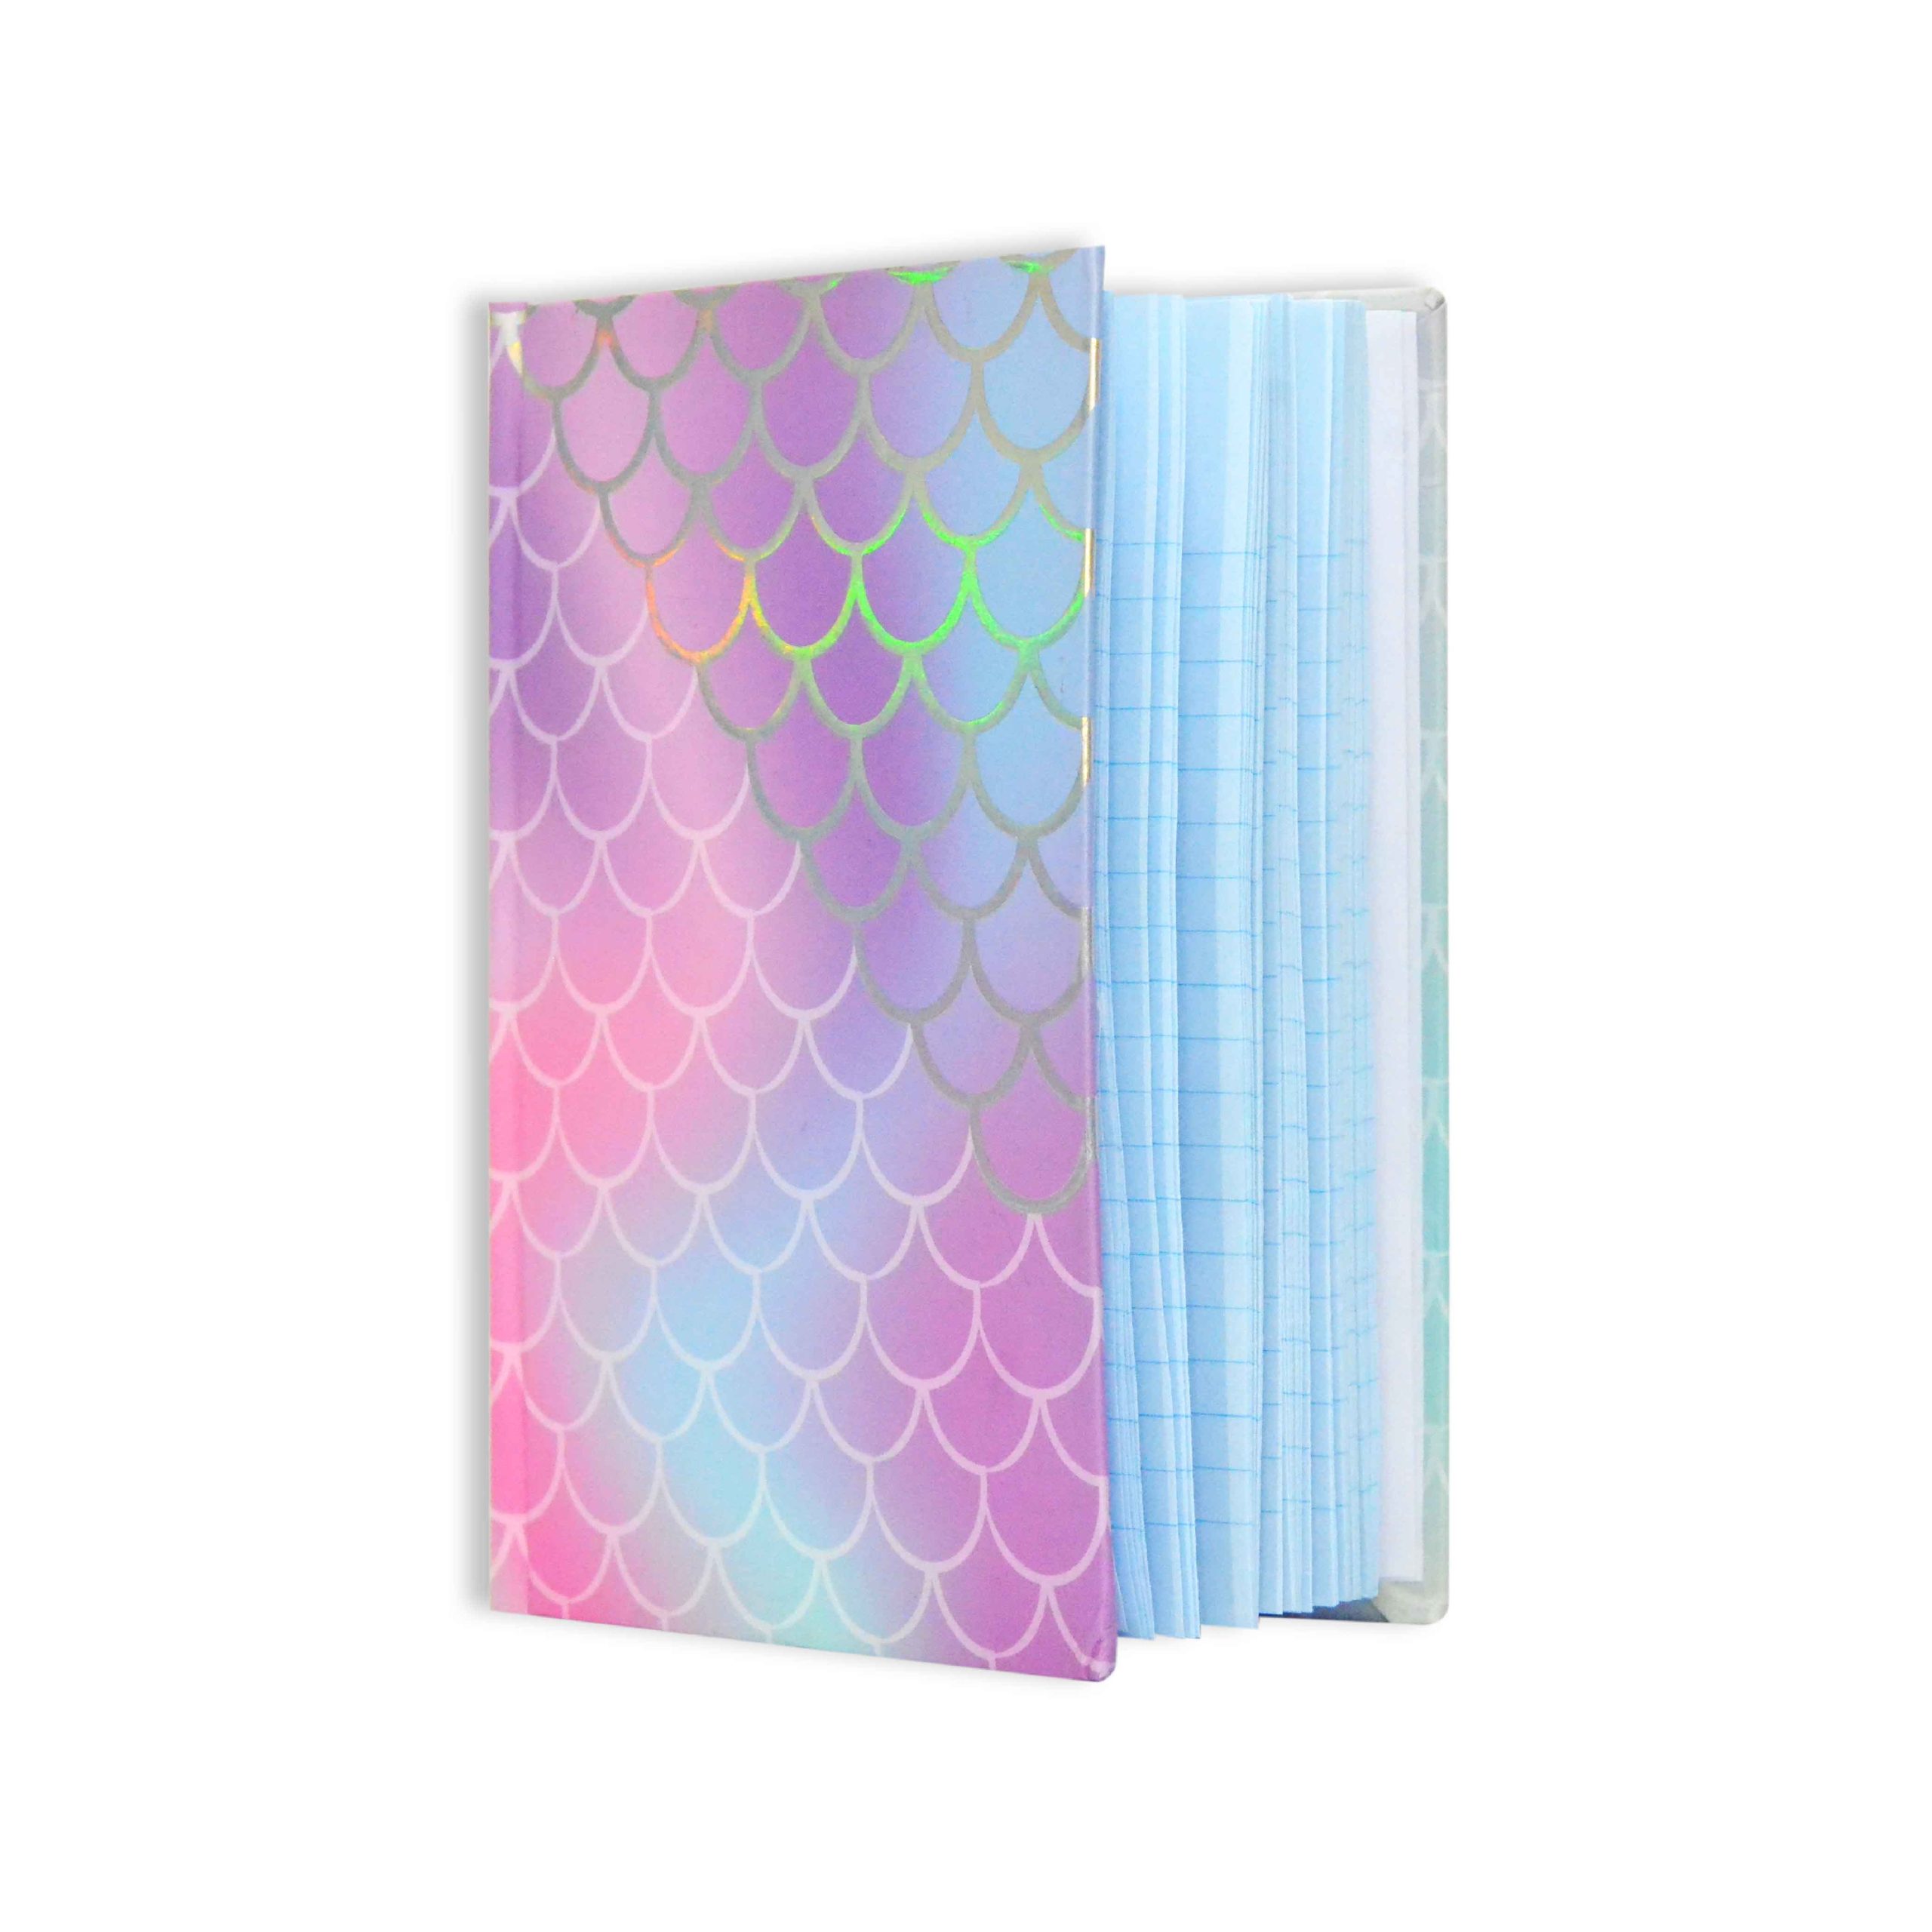 ST2707 Mermaid A6 Note Book Ruled 120 pgs 02 scaled